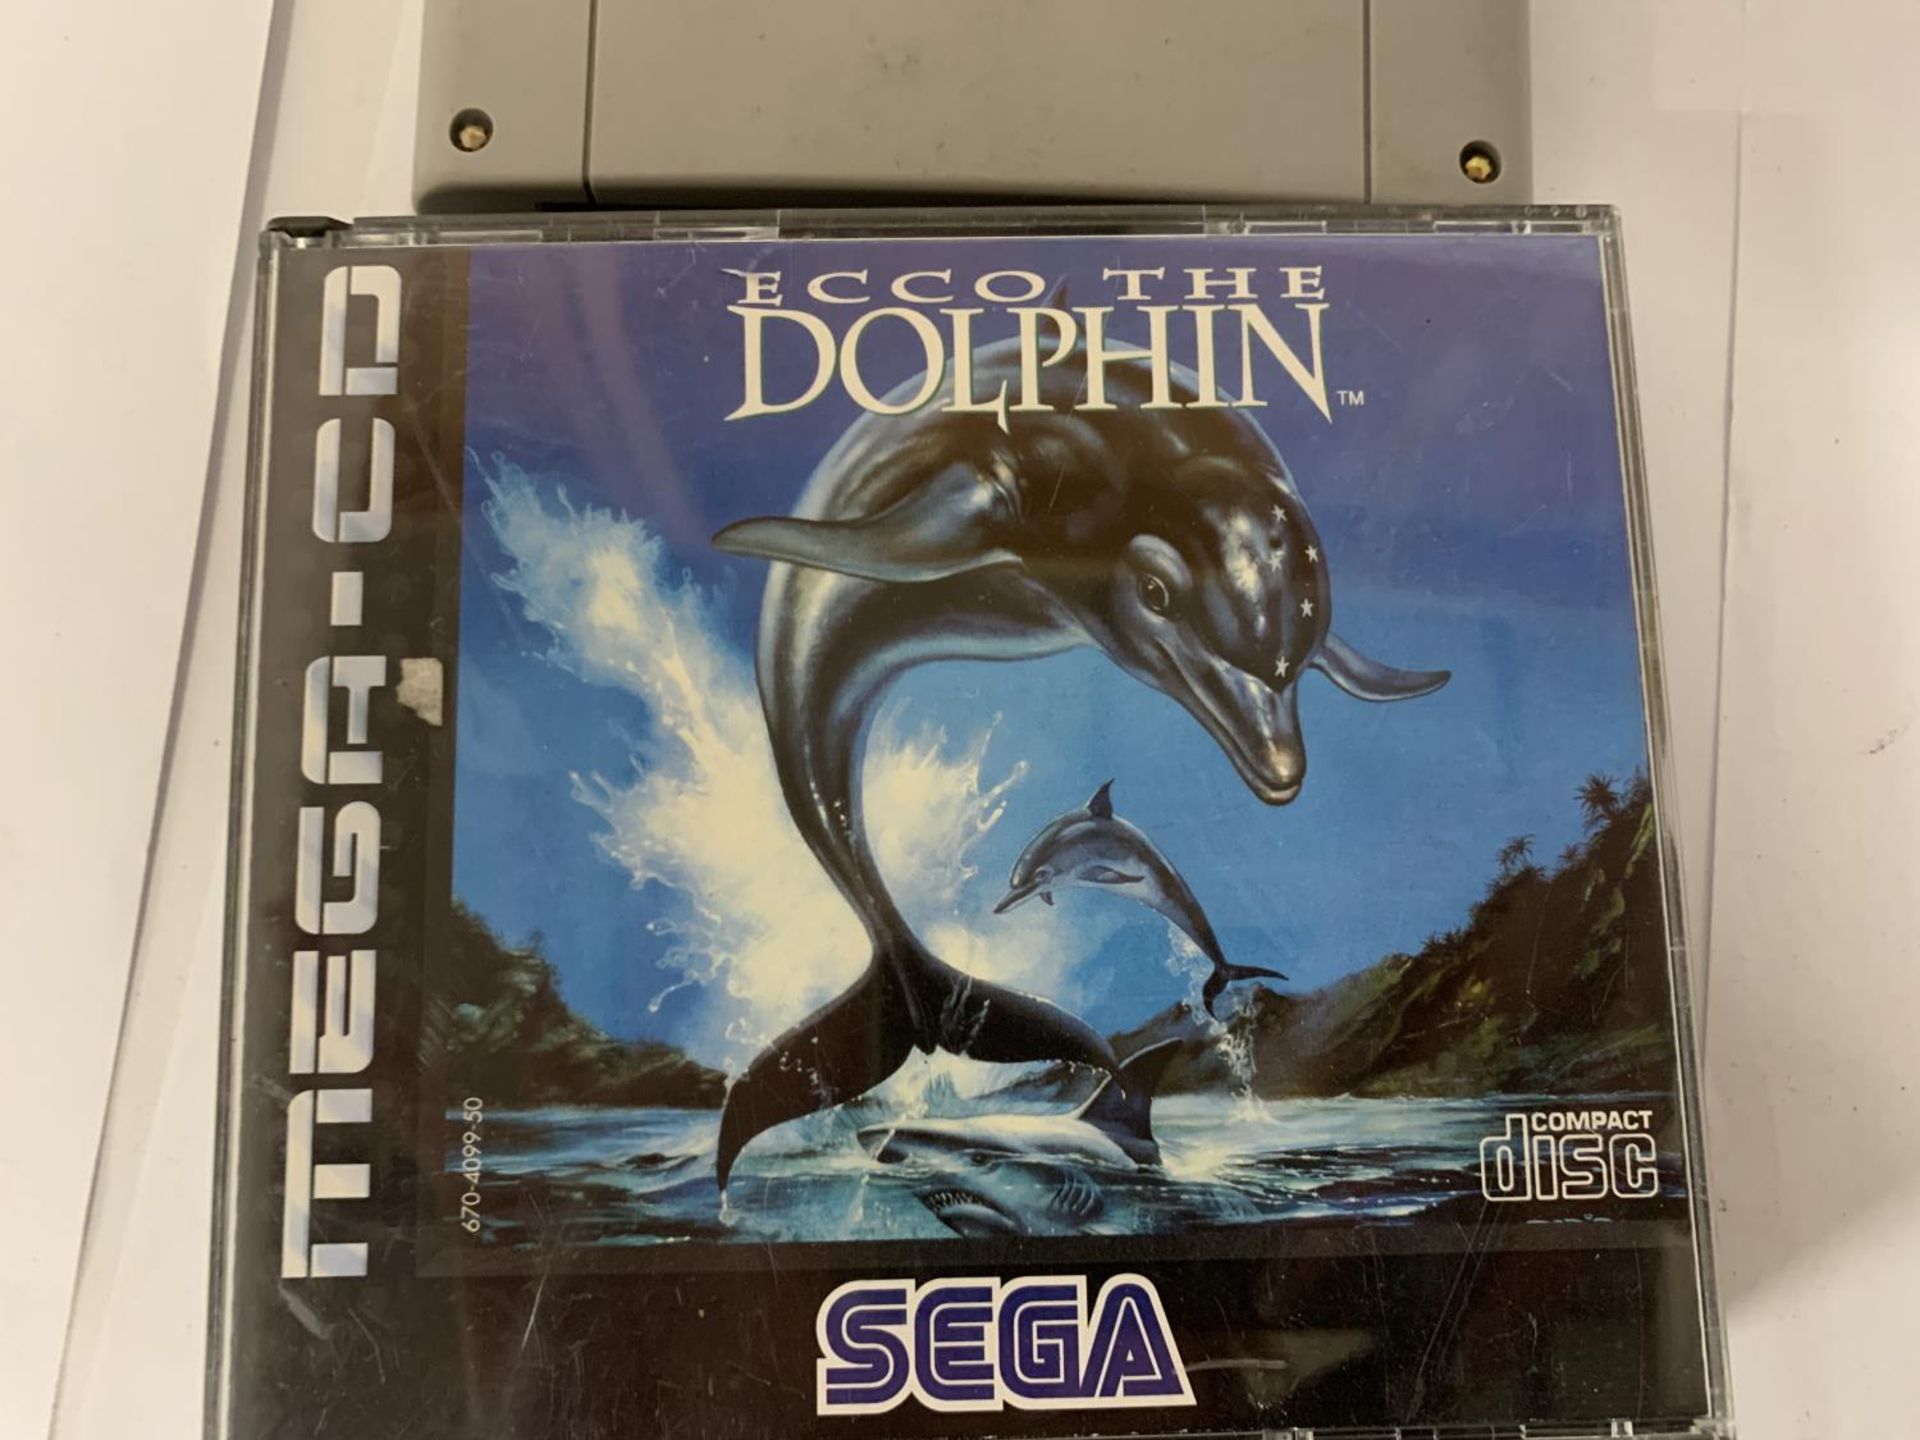 THREE SEGA GAMES INCLUDING STAR WARS ROGUE SQUADRON, STREET FIGHTER II AND ECCO THE DOLPHIN - Bild 3 aus 4